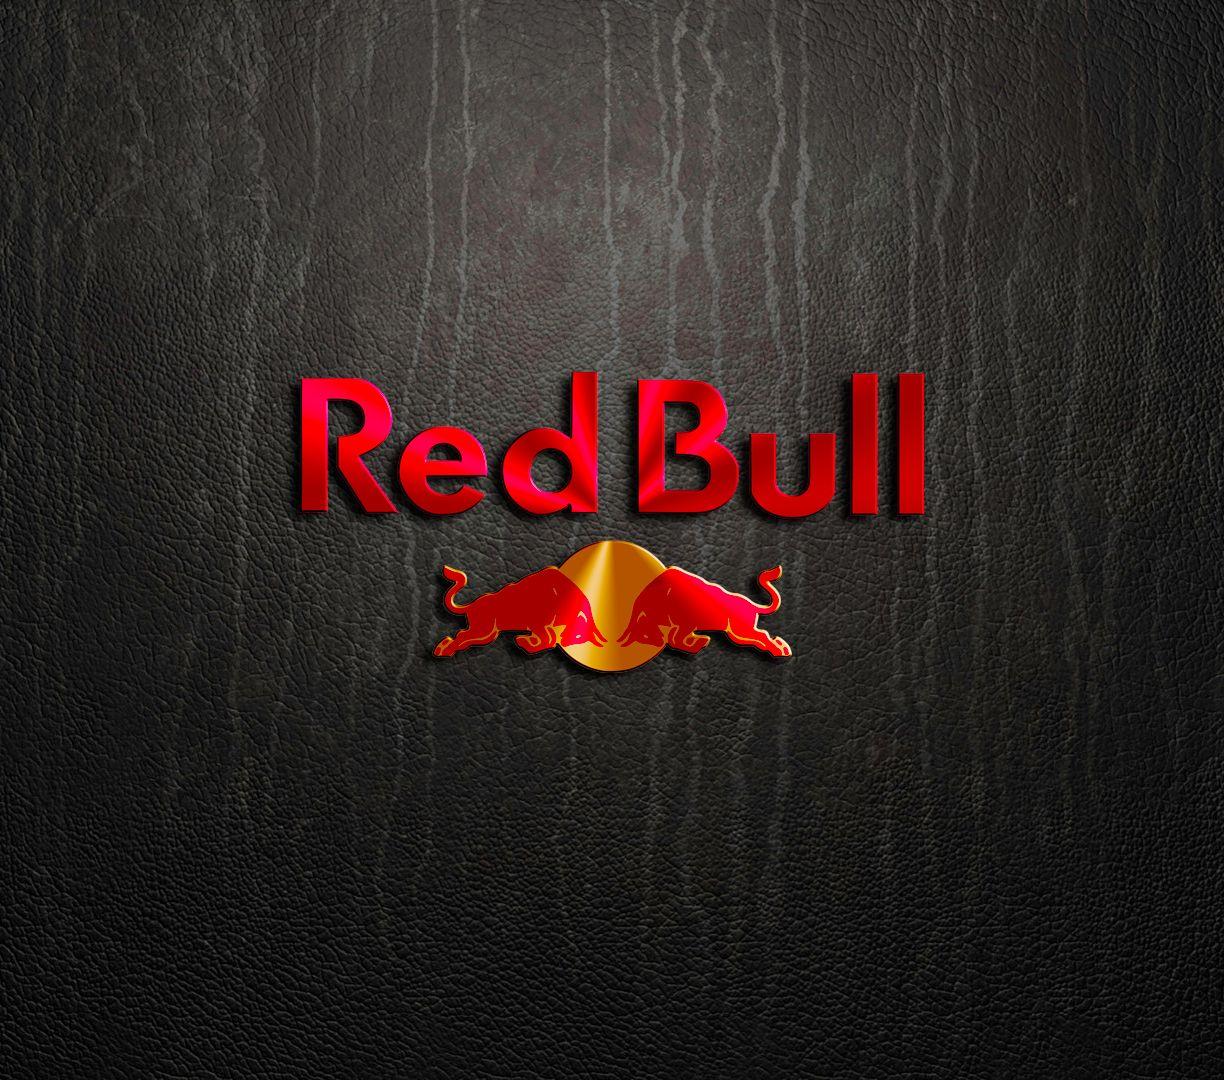 Gray and Red Bulls Logo - Michael Clark Photography Sports Photographer Editorial